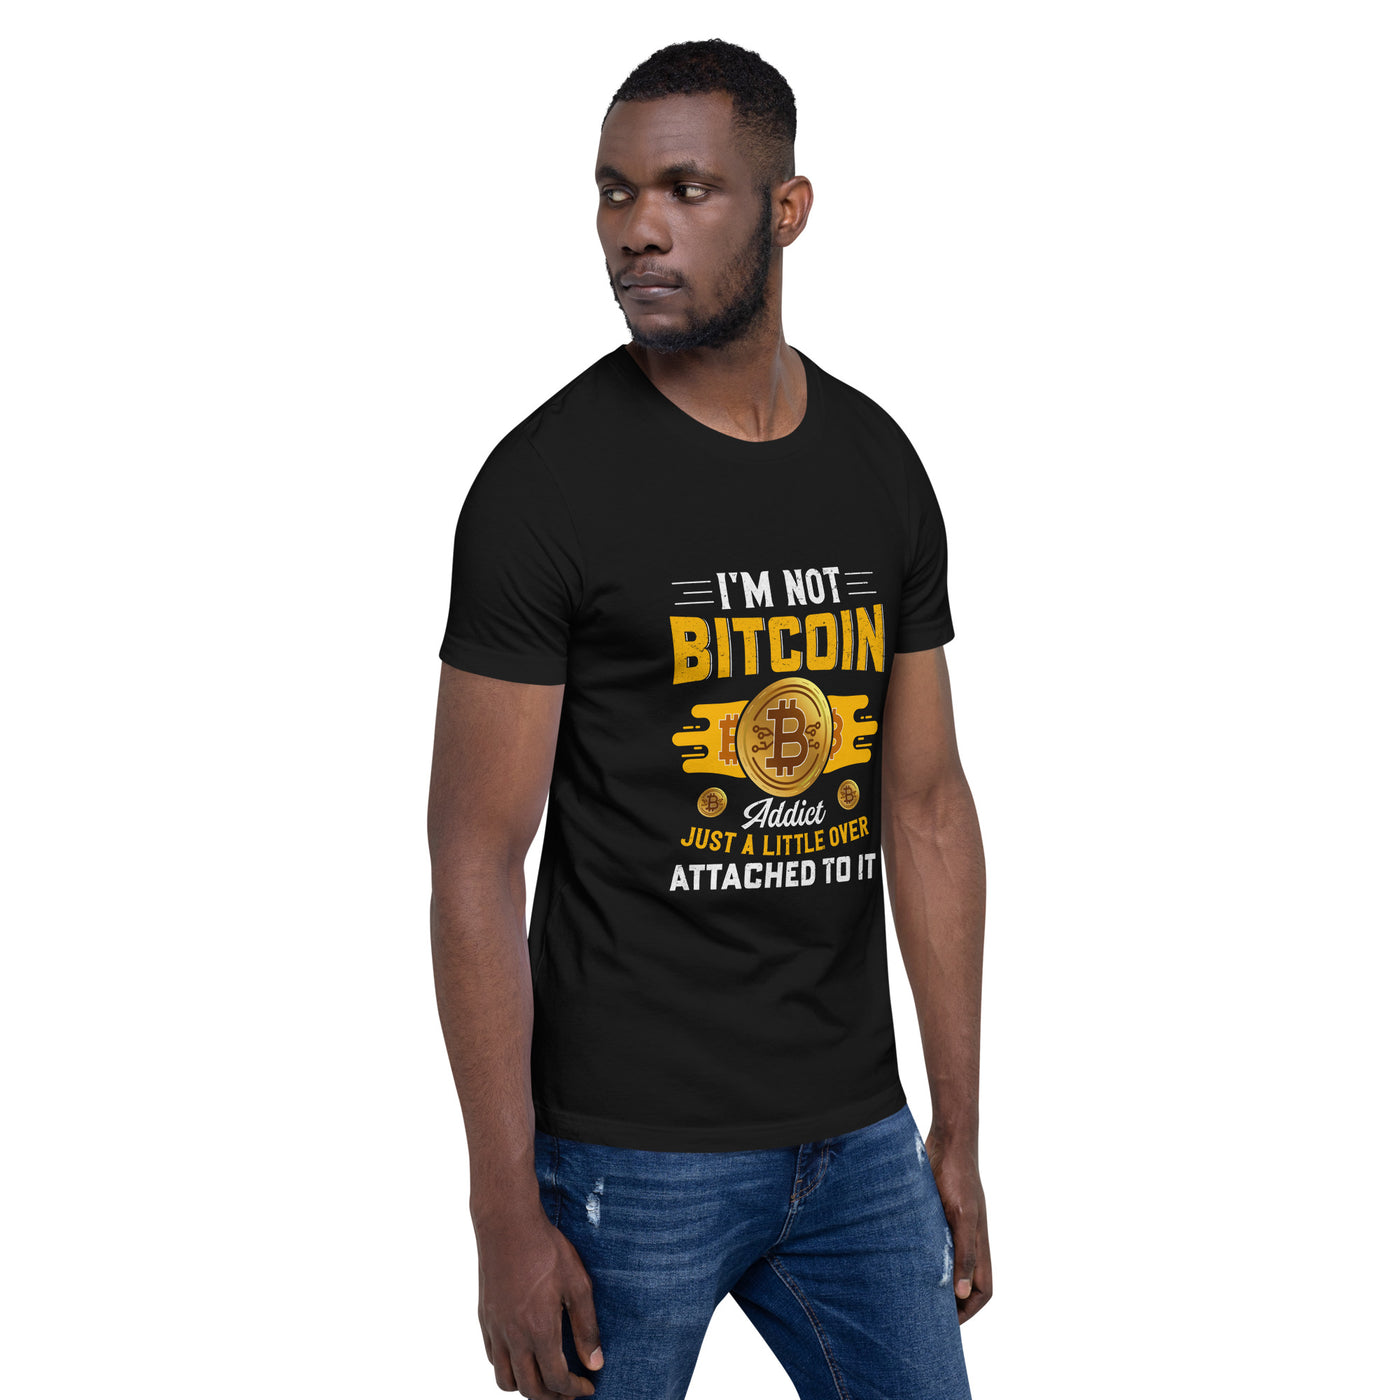 I am not a Bitcoin Addict Just a little attached to it - Unisex t-shirt